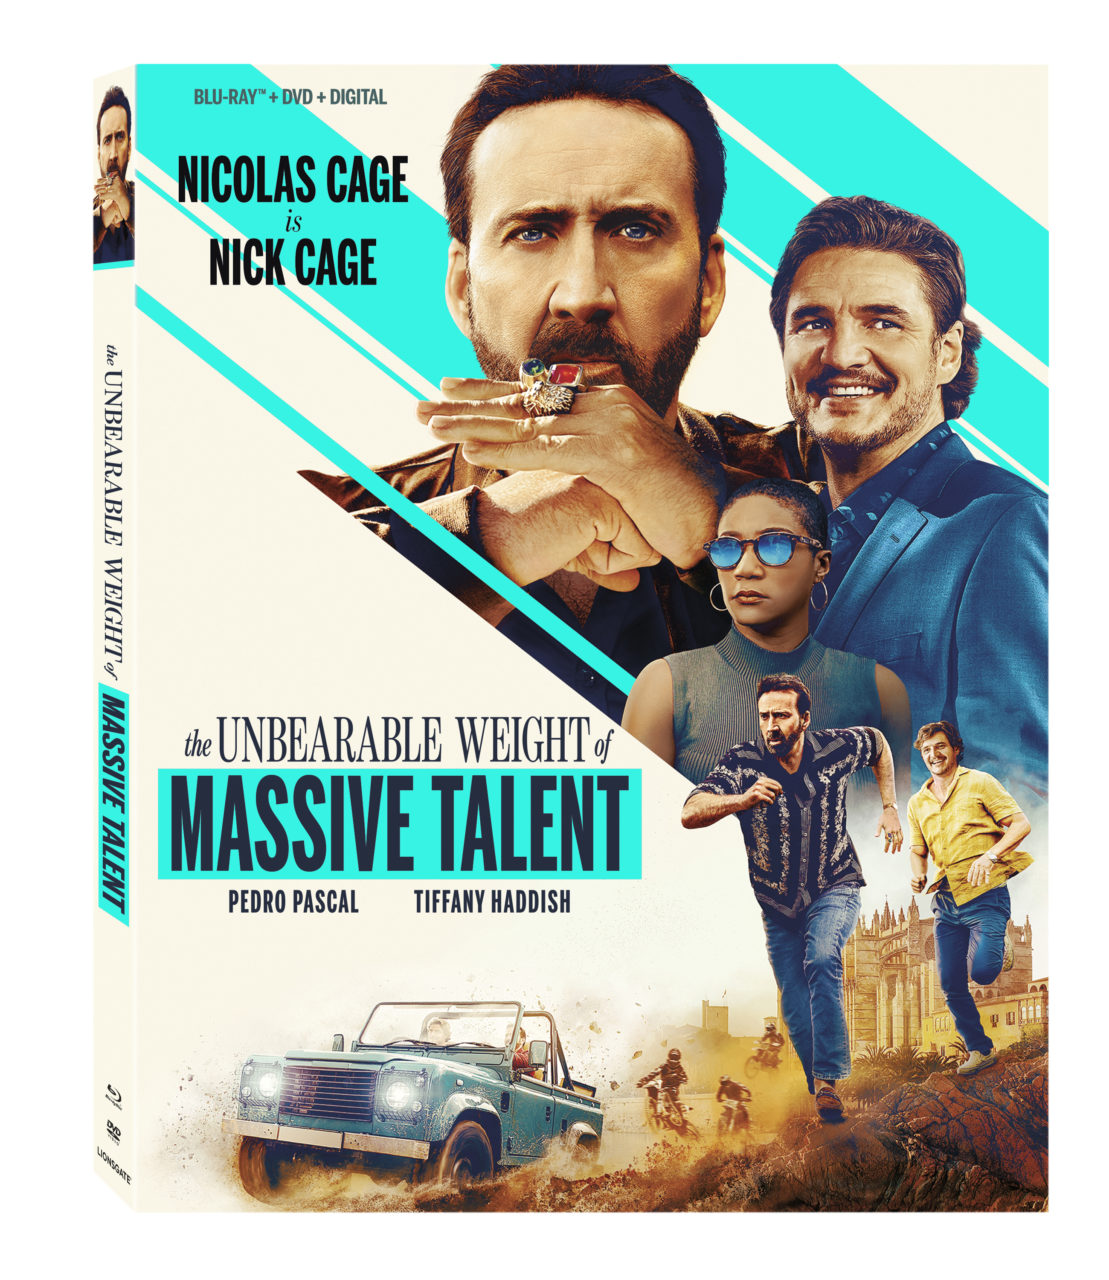 The Unbearable Weight Of Massive Talent Blu-Ray Combo Pack cover (Lionsgate)